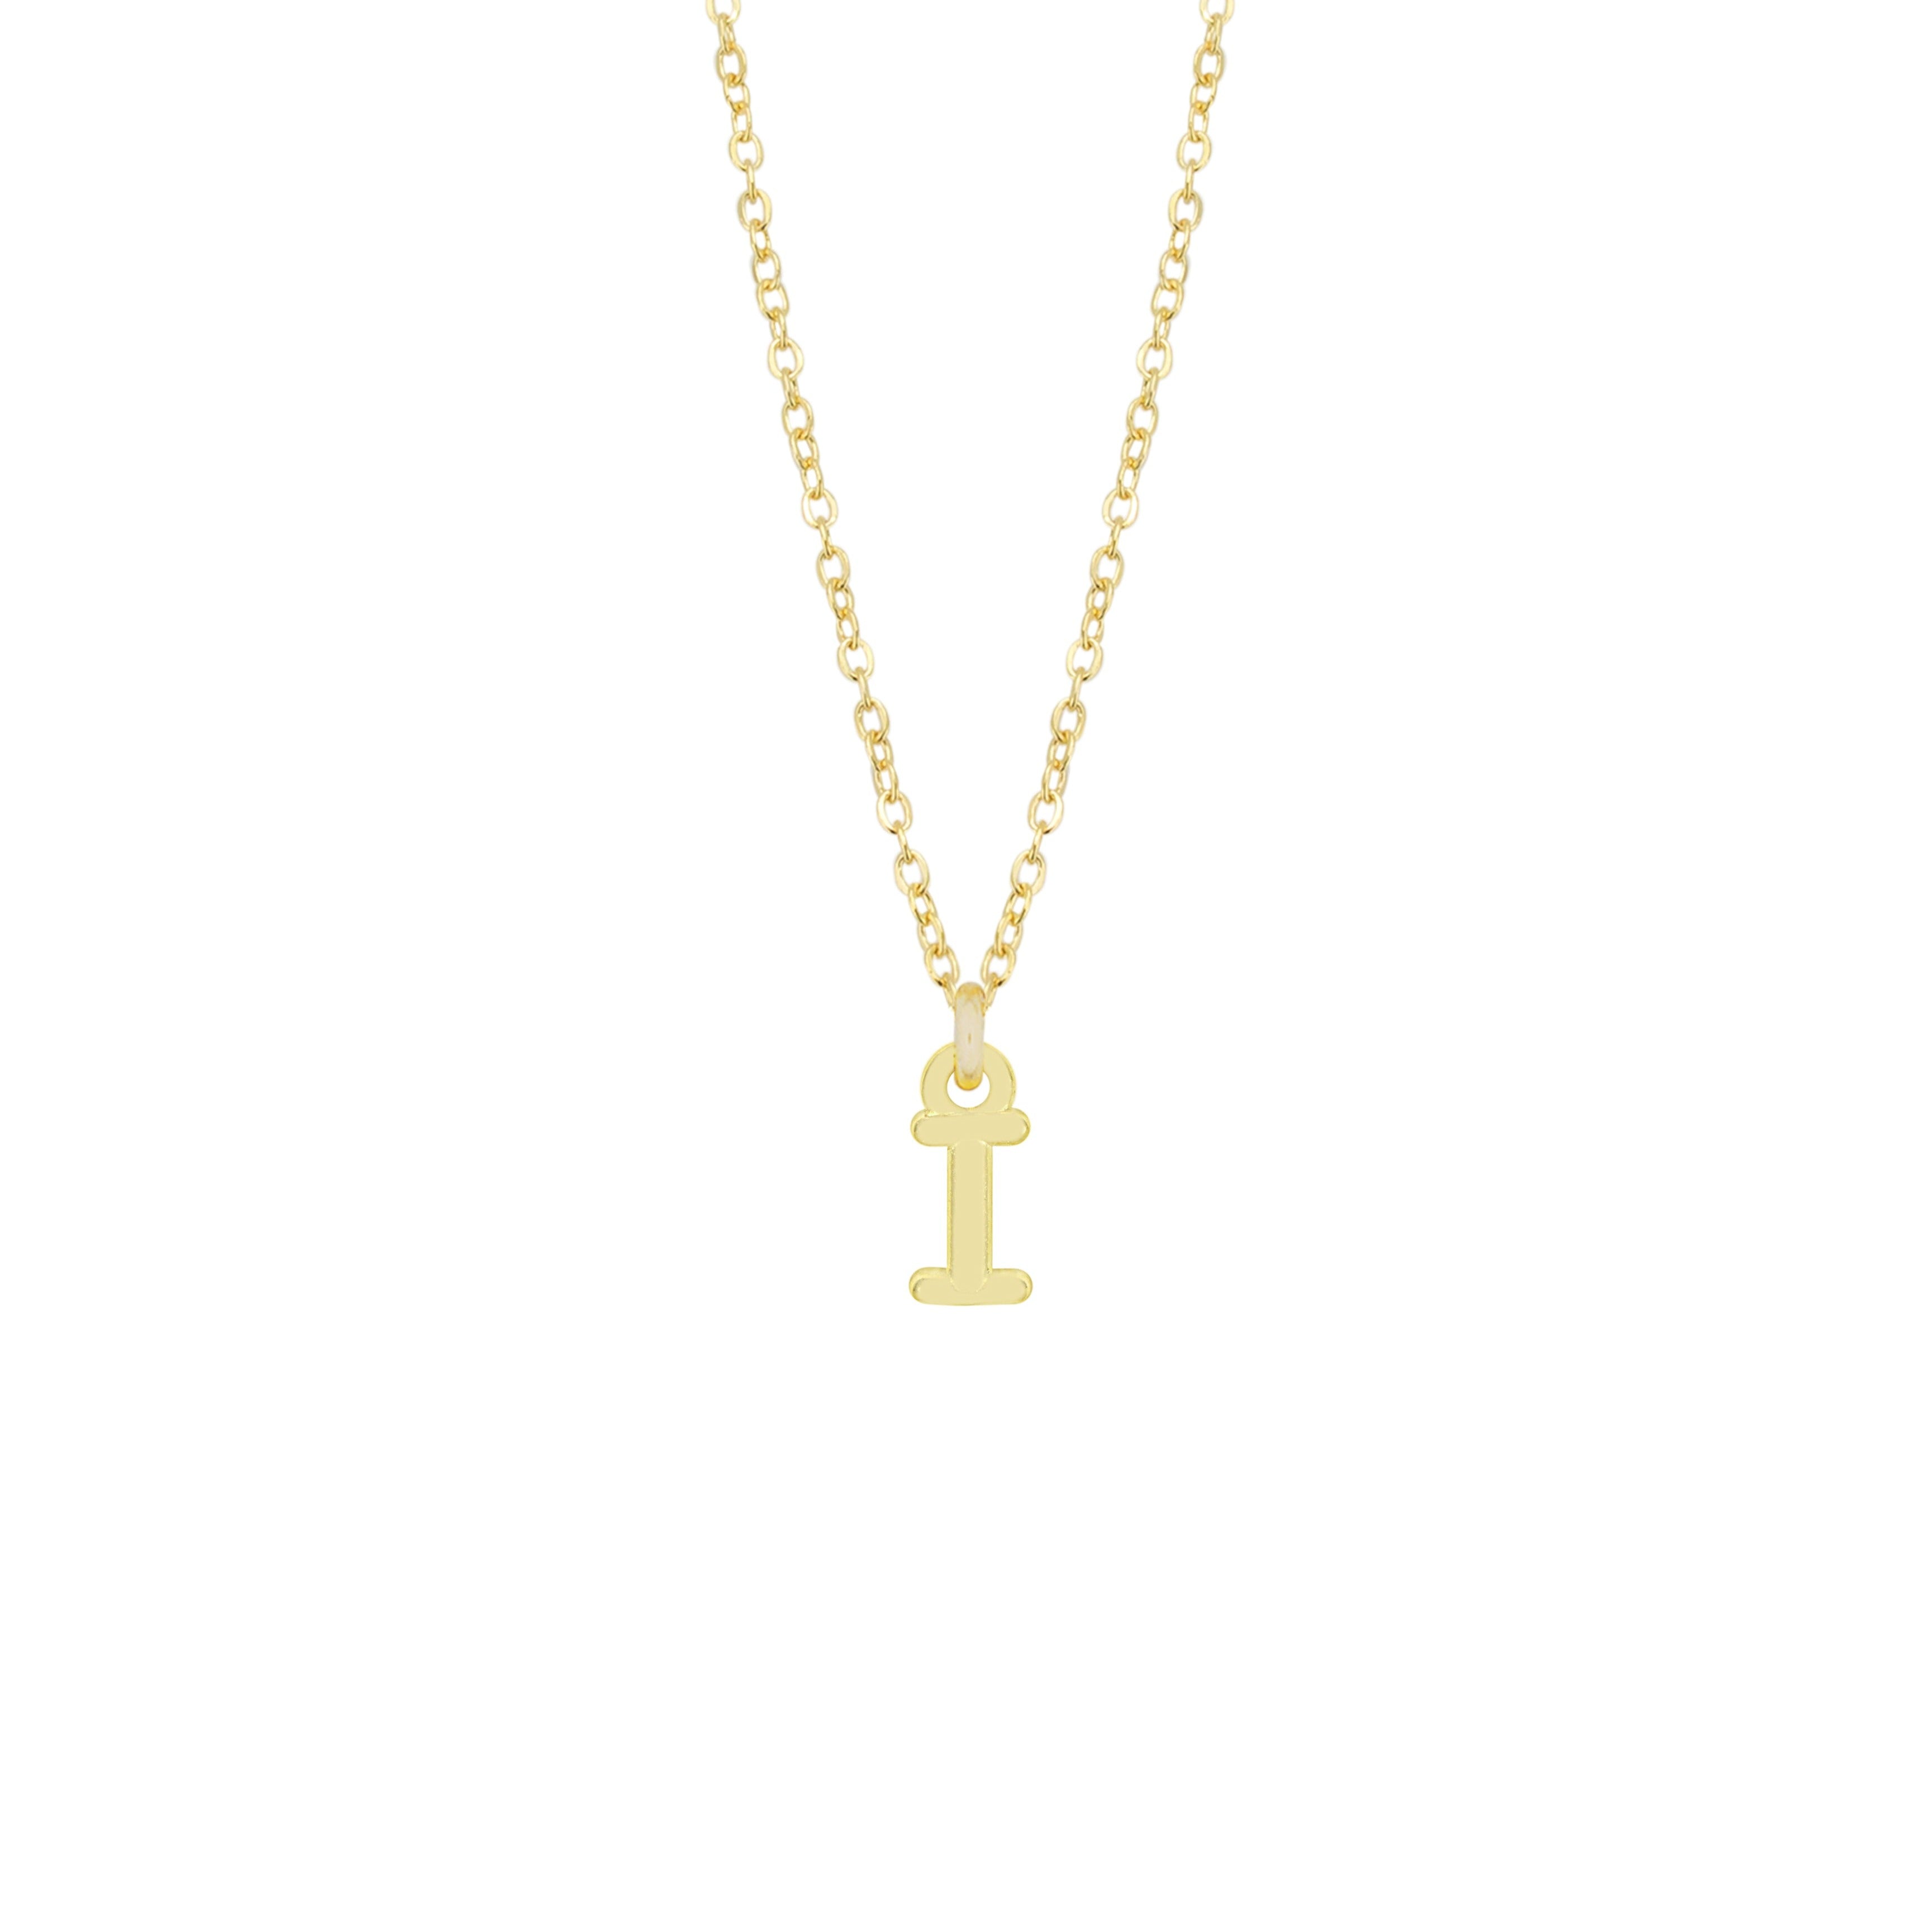 I Gold Initial Necklace by Katie Dean Jewelry, made in America, perfect for the dainty minimal jewelry lovers